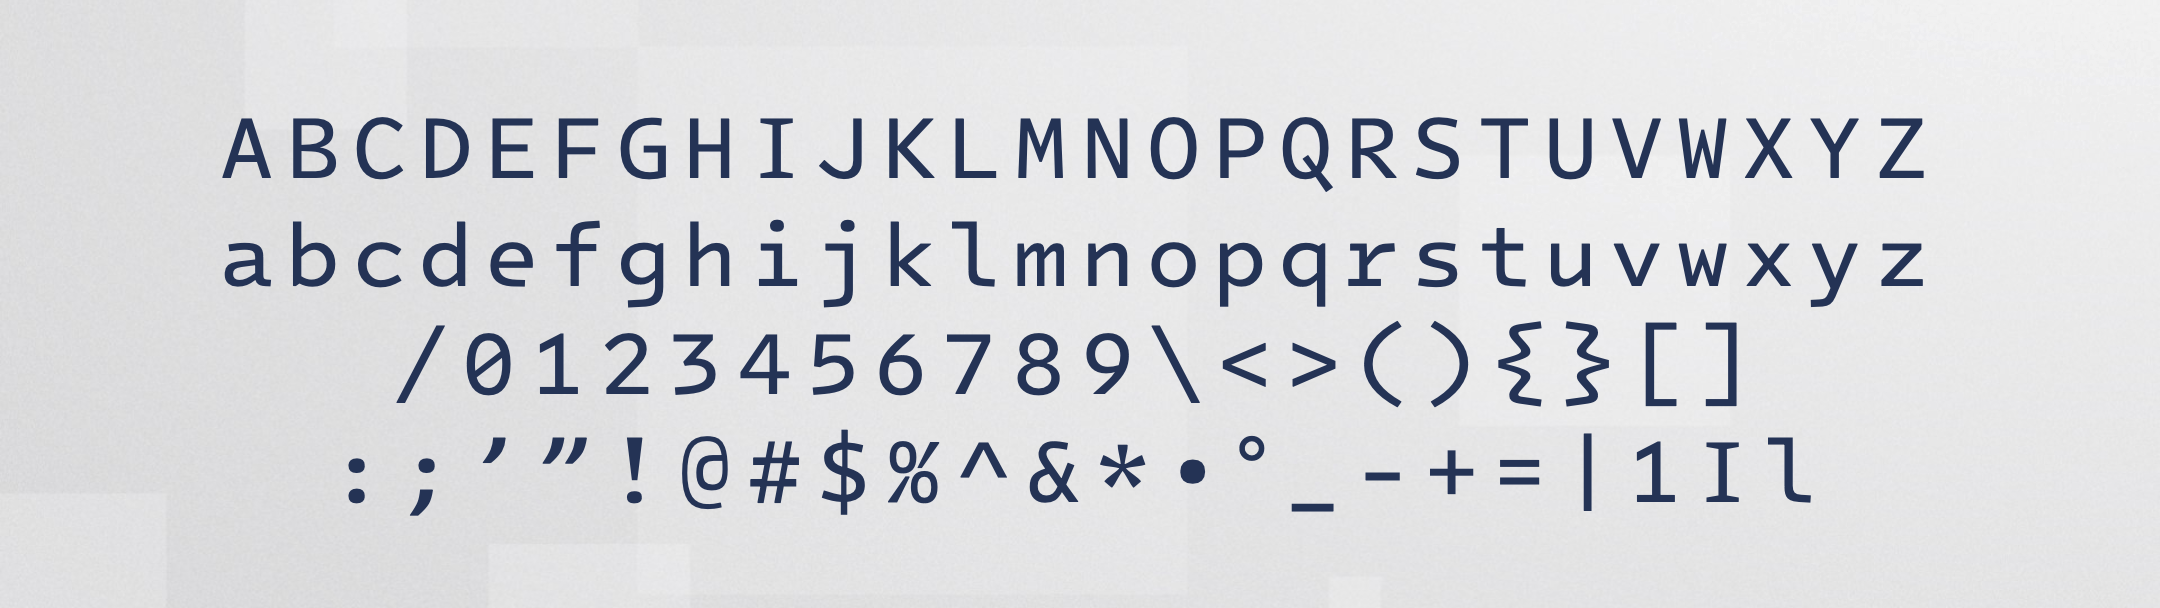 Letters, numbers, and special characters displayed using the Intel One monospaced font.